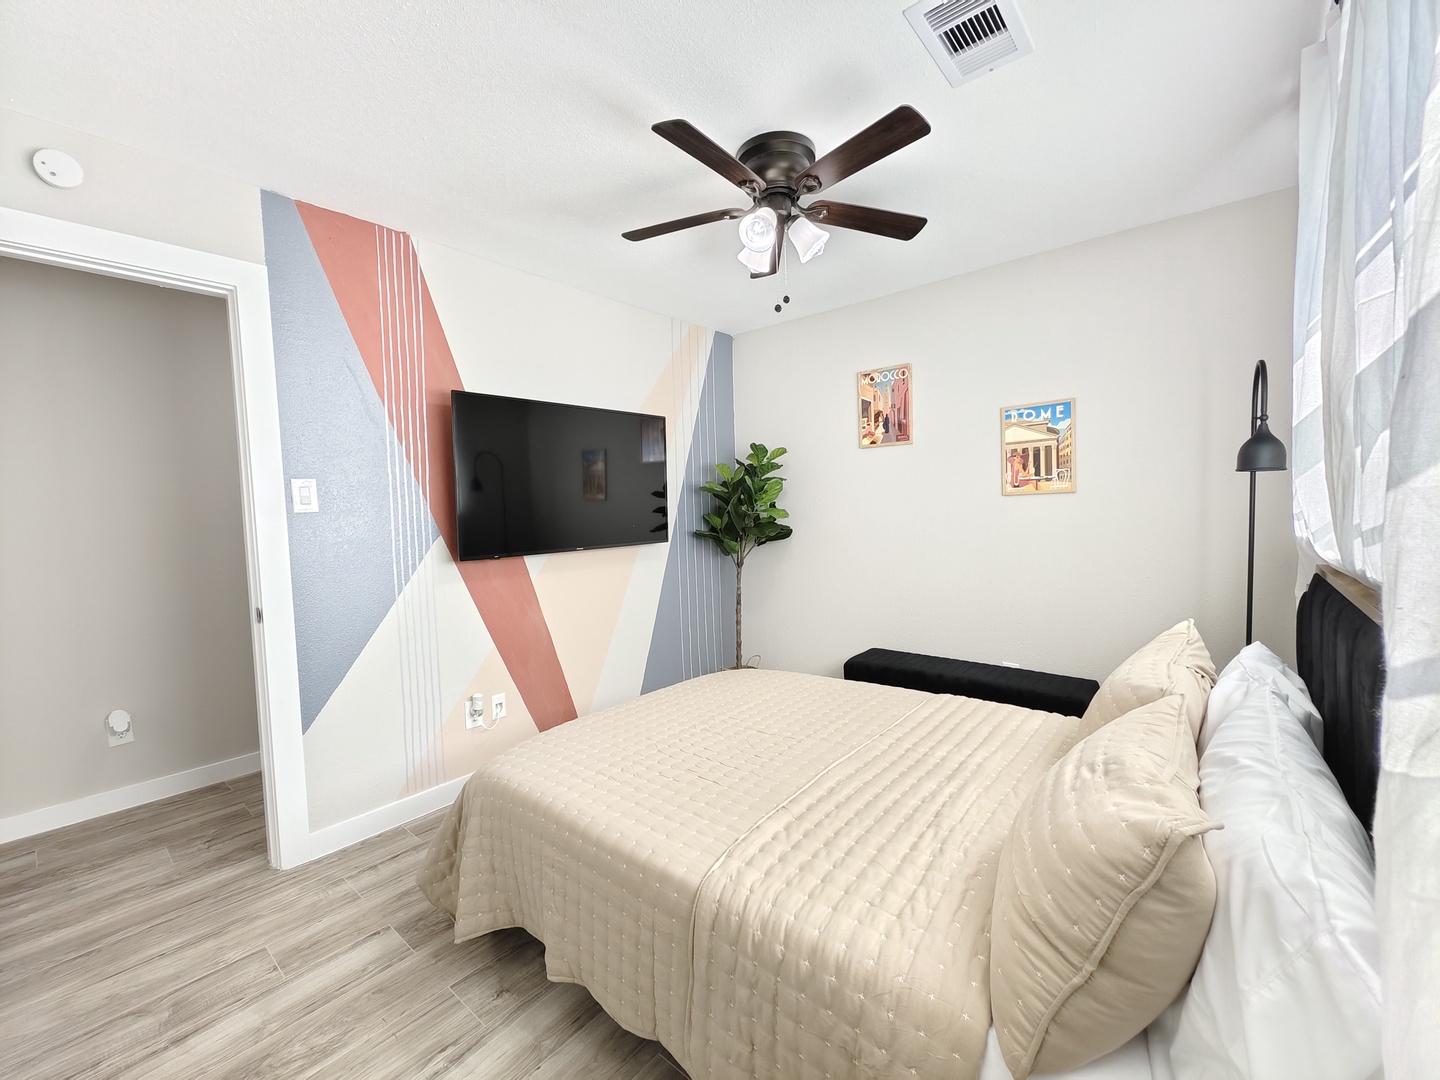 The third bedroom showcases a plush queen-sized bed & Smart TV